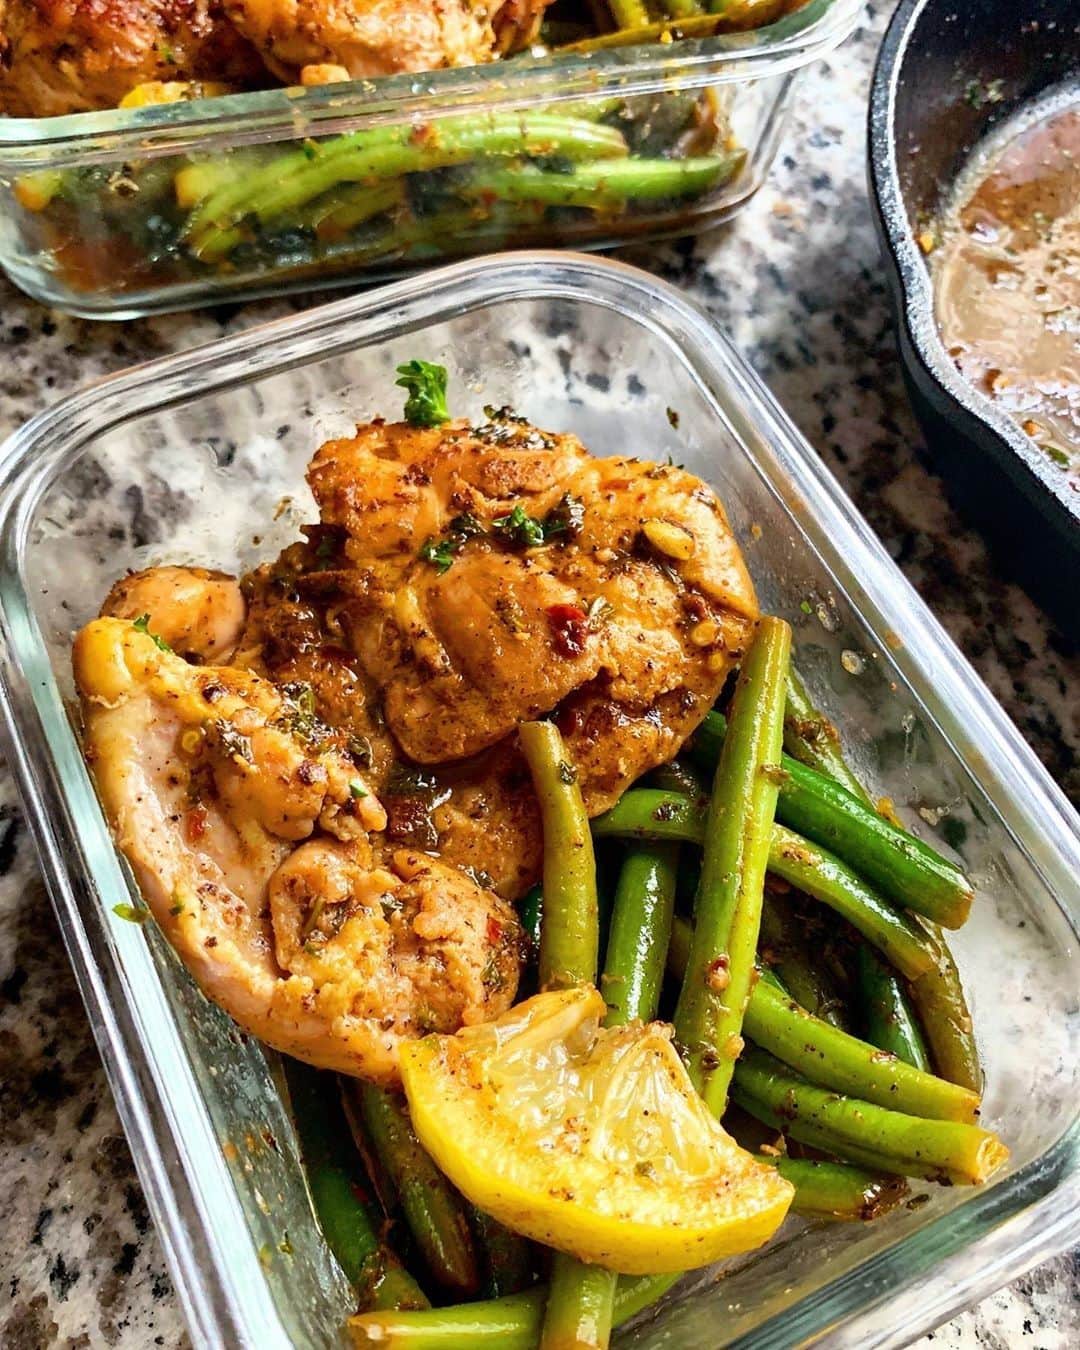 Flavorgod Seasoningsさんのインスタグラム写真 - (Flavorgod SeasoningsInstagram)「🍋 Lemon Garlic Butter Chicken and Green Beans 🍋⁠ -⁠ By: @keto_rebel⁠ -⁠ ⠀⁠ This meal was AMAZING!!! The best part, I made everything in one pan. It’s a great quick and easy weekday meal and also perfect for #mealprep⁠ ⠀⁠ Here’s the recipe ⬇️⁠ ⠀⁠ Ingredients:⁠ * 1 pound skinless, boneless chicken thighs⁠ * 1 pound green beans, trimmed⁠ * 3 tablespoons butter, divided or⁠ * 4 garlic cloves, minced⁠ * 1 teaspoon paprika⁠ * 1 teaspoon onion powder⁠ * 1 tablespoon lemon garlic seasoning (I used @flavorgod )⁠ * Salt and fresh cracked pepper⁠ * Juice of 1/2 lemon⁠ * 1/2 cup chicken broth⁠ * Crushed red chili pepper flakes⁠ * 1/2 cup fresh chopped parsley⁠ ⠀⁠ Directions:⁠ 1. In a small bowl, combine onion powder, paprika, salt, lemon garlic and pepper. Season chicken thighs generously with the spice mixture. Set aside while you prepare green beans.⁠ ⠀⁠ 2. Steam green beans until almost done but still crisp.⁠ ⠀⁠ 3. Melt 2 tablespoons butter in a large skillet over medium-low heat. Lay the seasoned chicken thighs in one layer in the skillet. Cook for 5-6 minutes then flip and cook another 5-6 minutes, until cooked through. If chicken browns too quickly, lower the heat. Adjust timing depending on the thickness. Transfer chicken to a plate and set aside.⁠ ⠀⁠ 4. In the same skillet, lower the heat and melt the remaining tablespoon butter. Add chopped parsley, garlic, red crushed chili pepper flakes, and pre-cooked green beans and cook for 4 to 5 minutes, stirring regularly, until cooked to your liking. Add lemon juice and chicken stock and reduce the sauce for a couple of minutes, until slightly thickened.⁠ ⠀⁠ 5. Add cooked chicken thighs back to the pan and reheat quickly.⁠ -⁠ KETO Seasonings on Sale here ⬇️⁠ Click the link in the bio -> @flavorgod⁠ www.flavorgod.com⁠ -⁠ -⁠ #food #foodie #flavorgod #seasonings #glutenfree #mealprep  #keto #paleo #vegan #kosher #breakfast #lunch #dinner #yummy #delicious #foodporn」7月23日 8時00分 - flavorgod